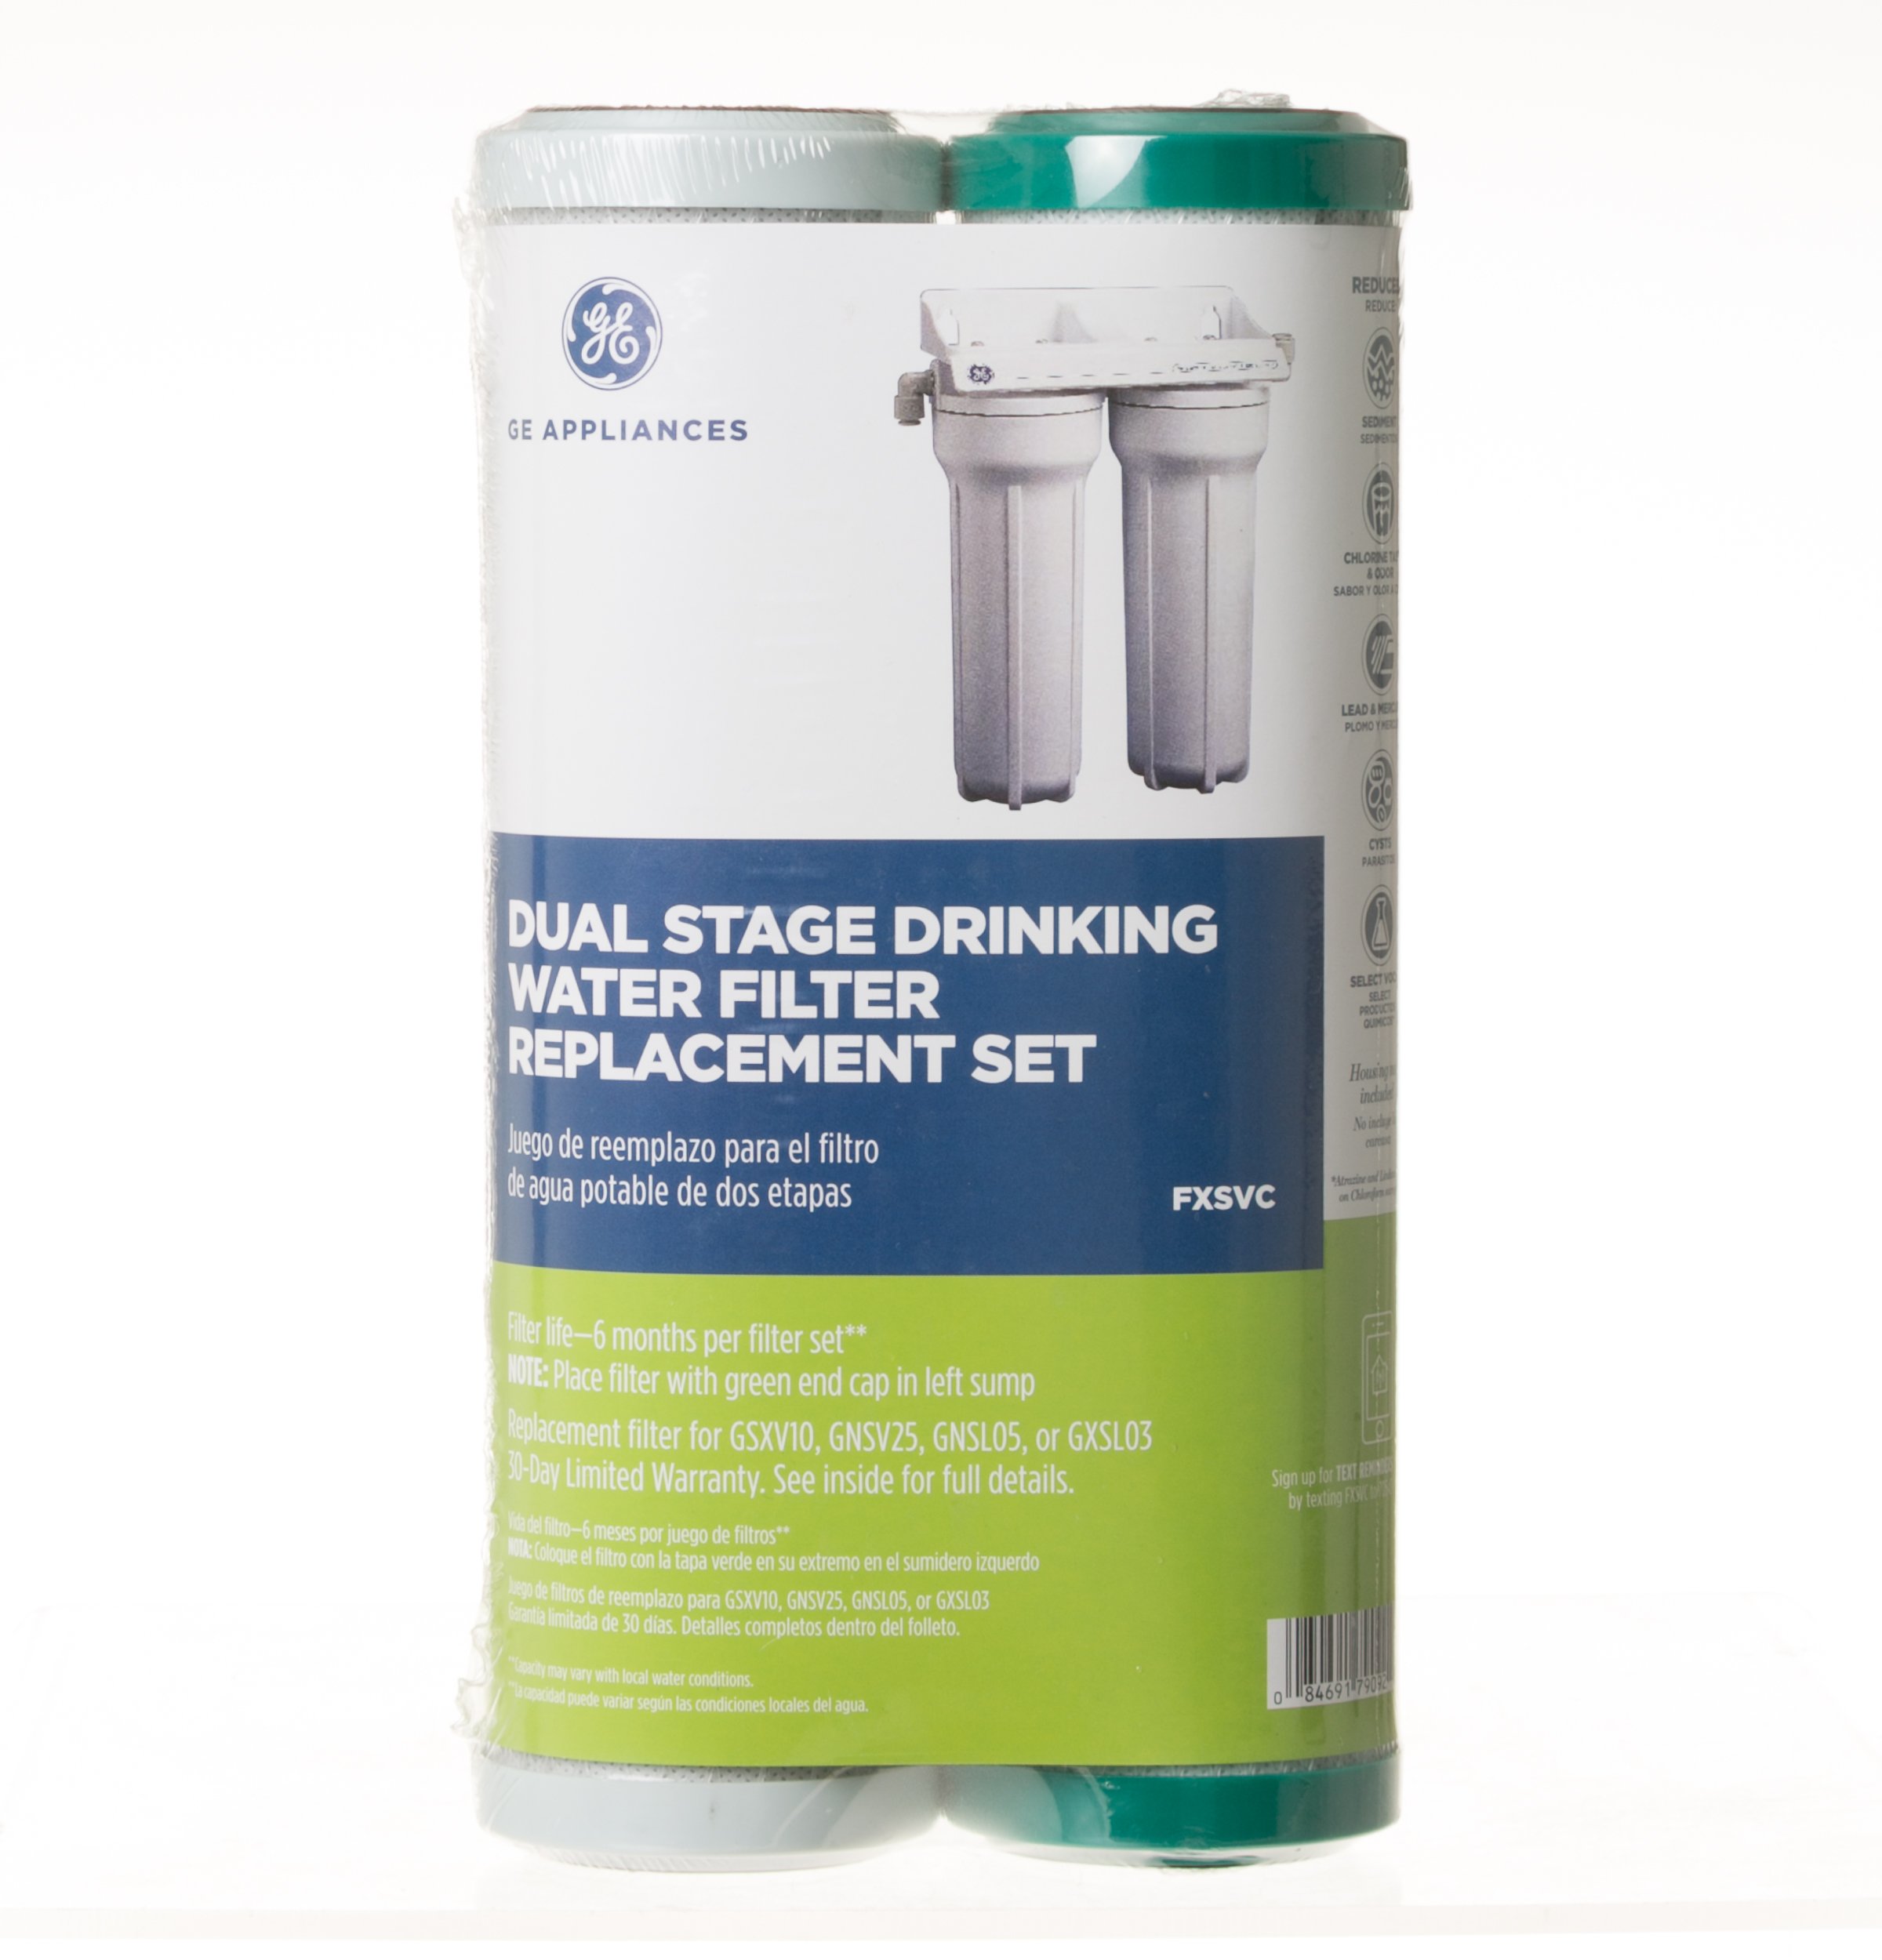 drinking water purification systems reviews